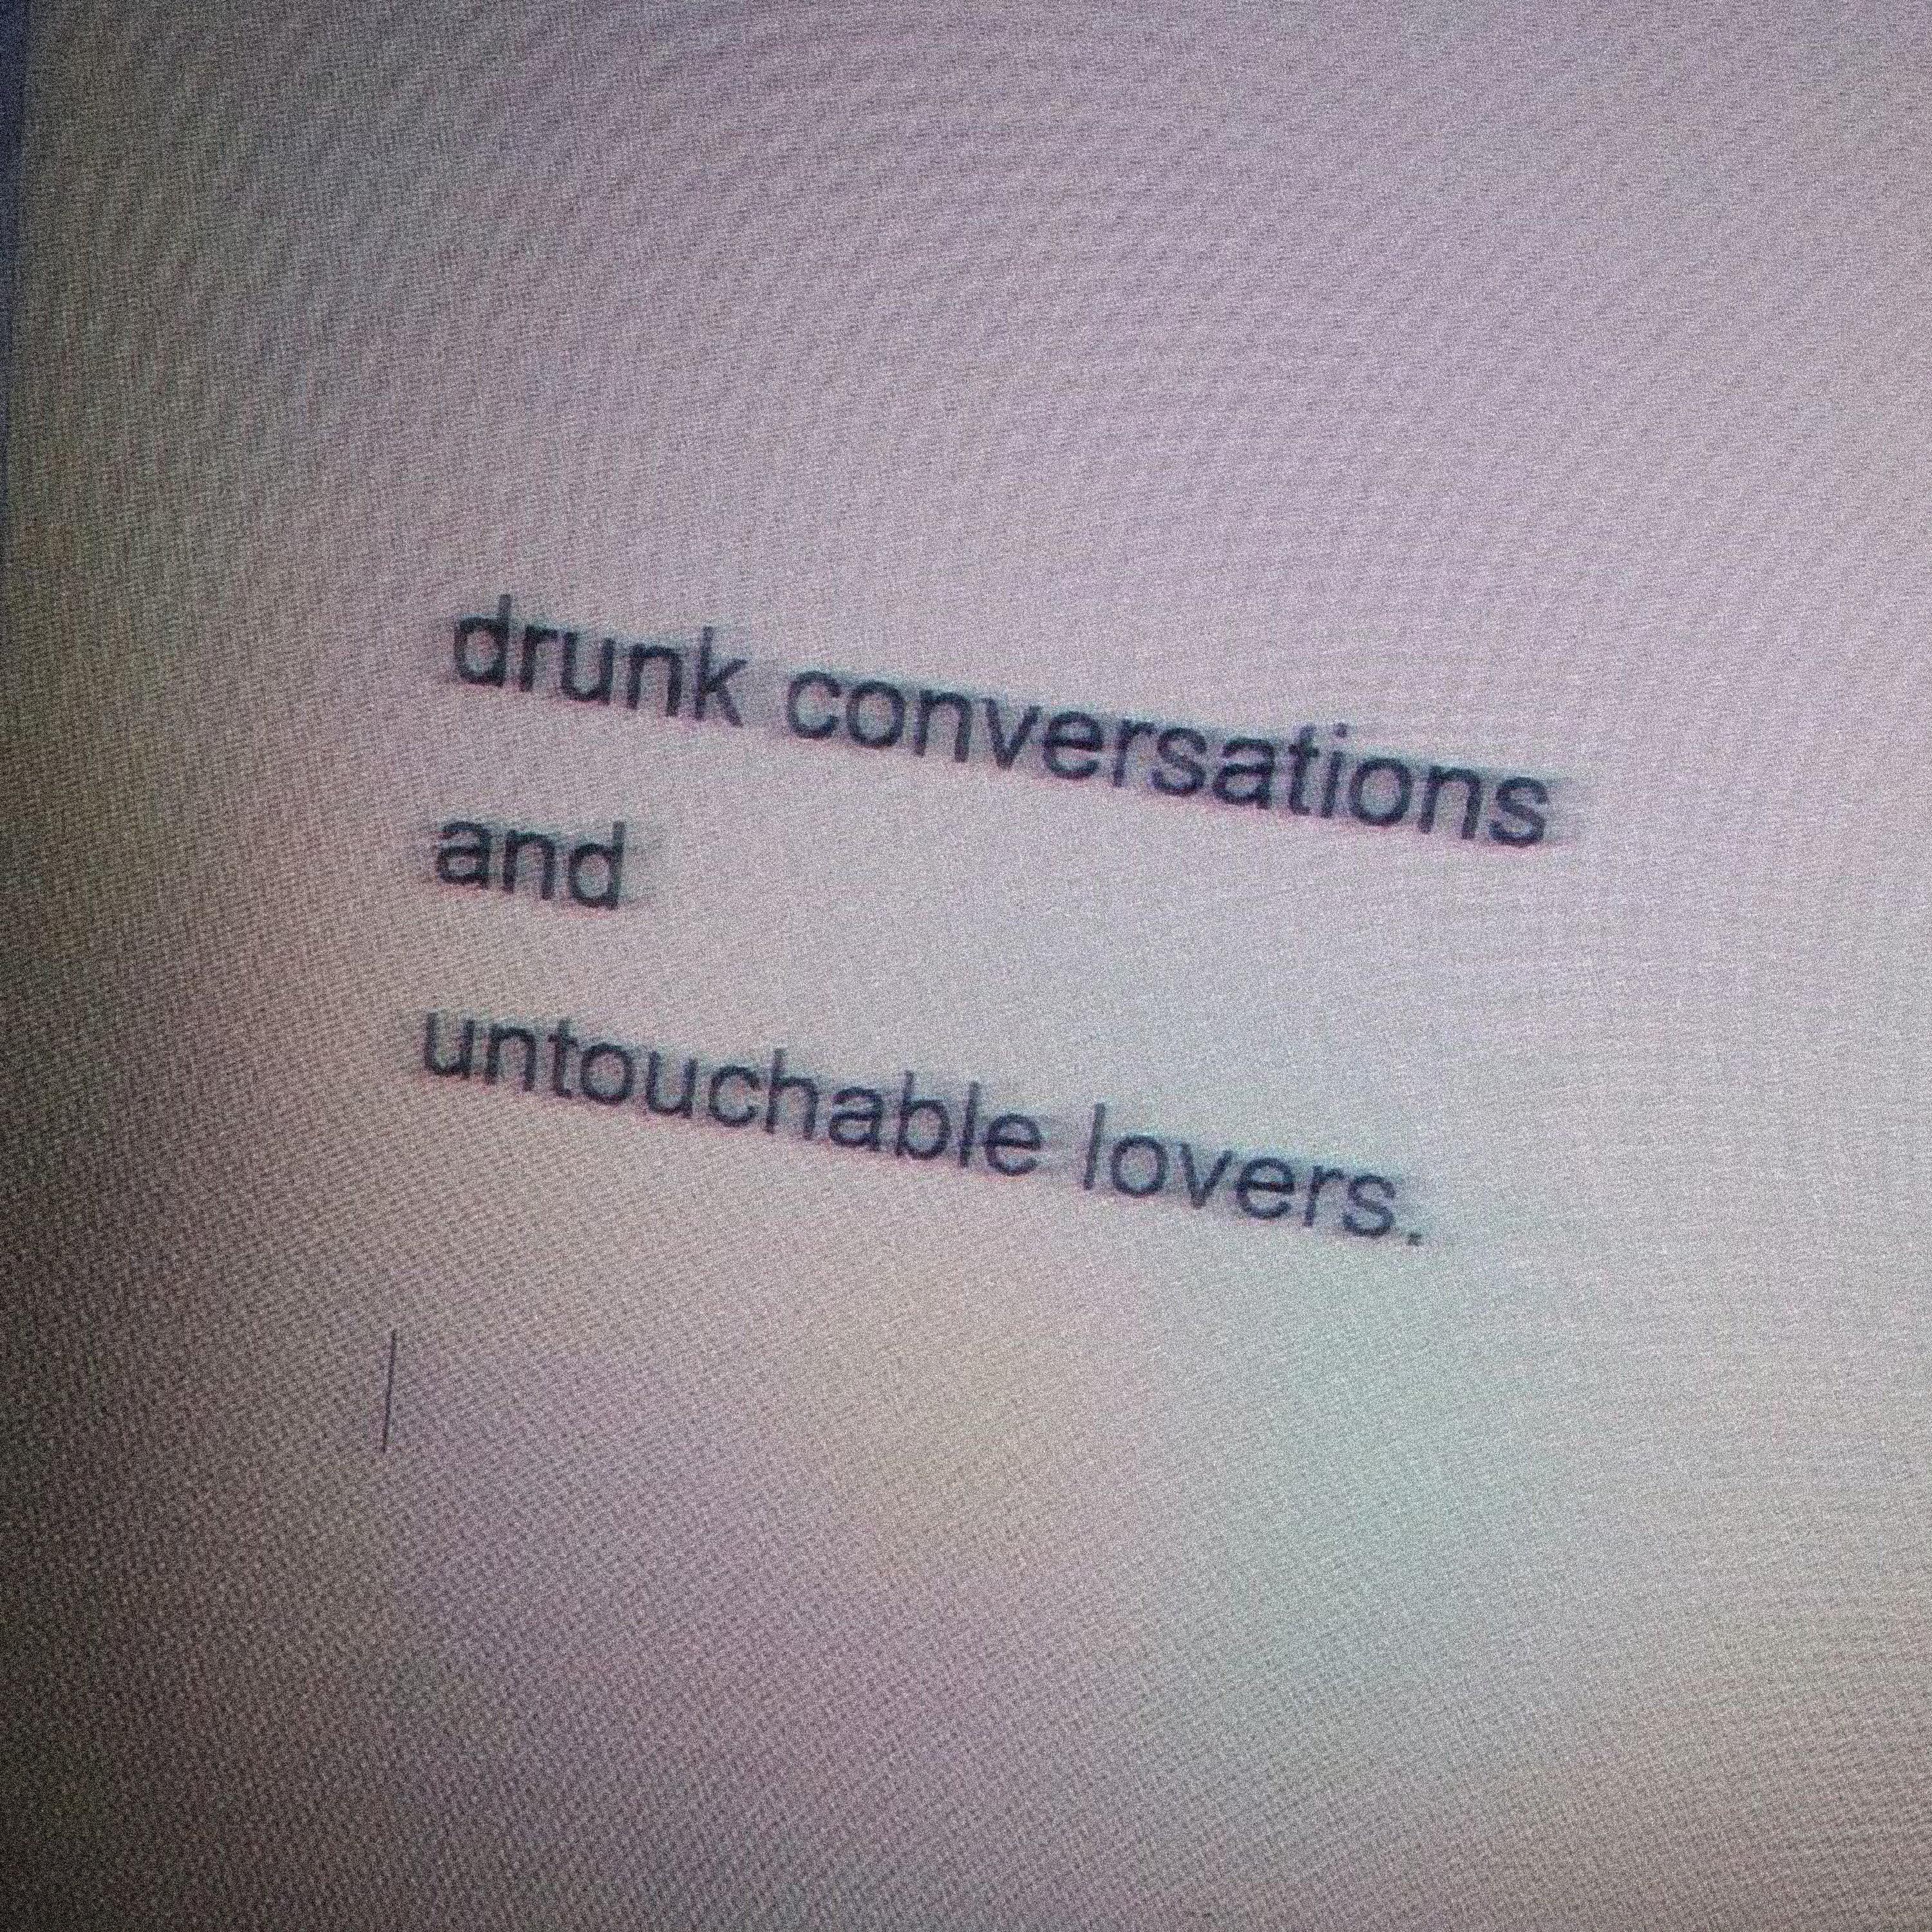 drunk conversations and untouchable lovers.